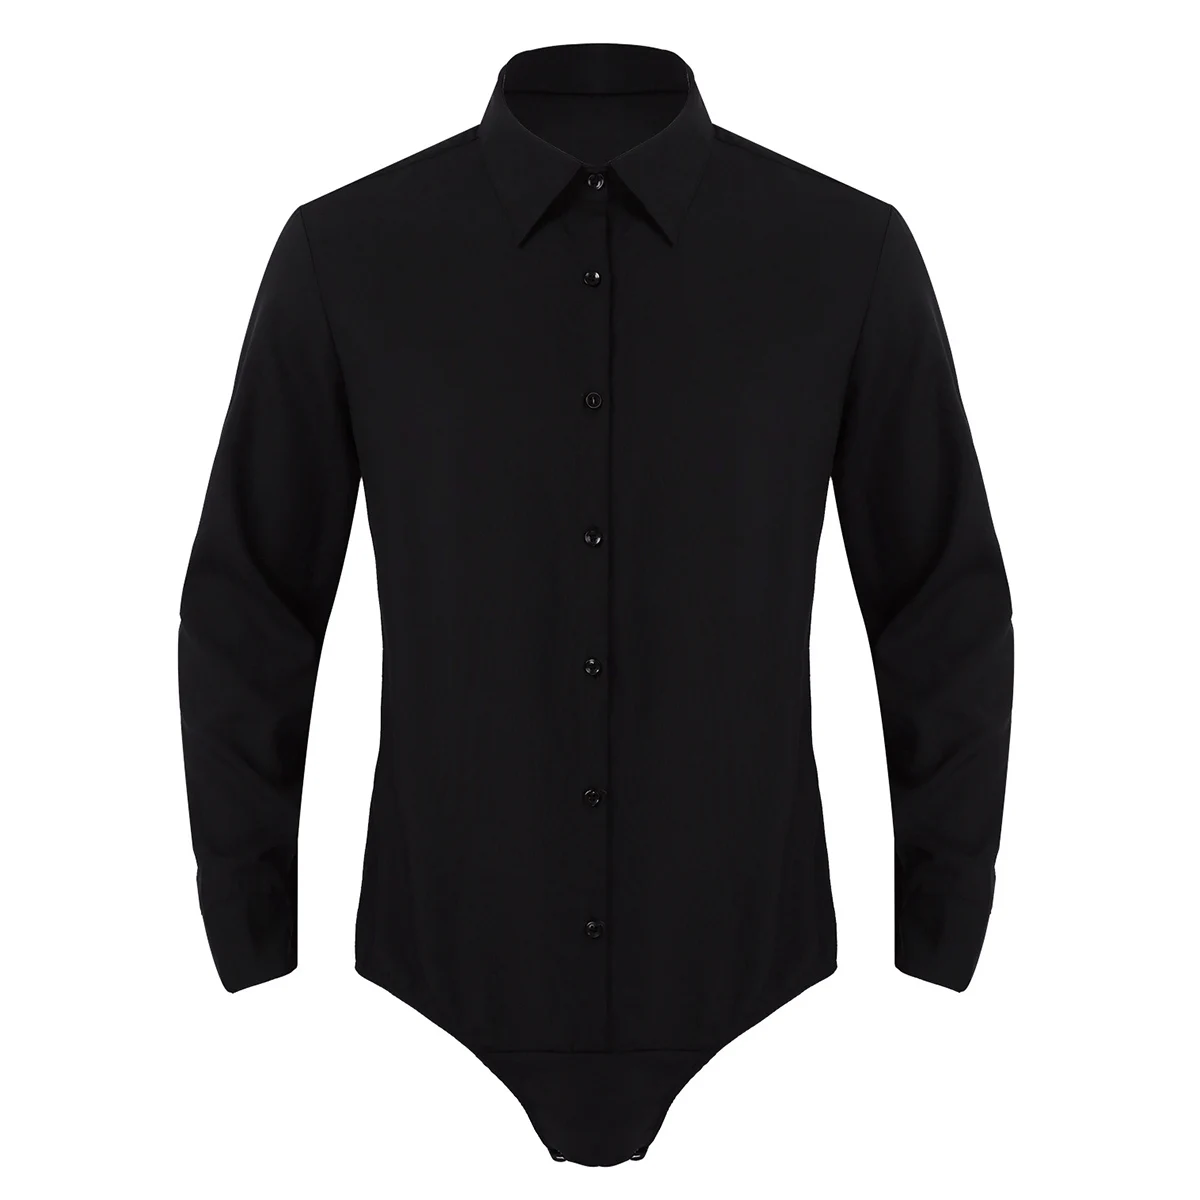 

Mens Adult Turn-down Collar Hemd-Body Costumes Button Down Comfortable Casual Bodysuit Shirt Tops for Evening Parties